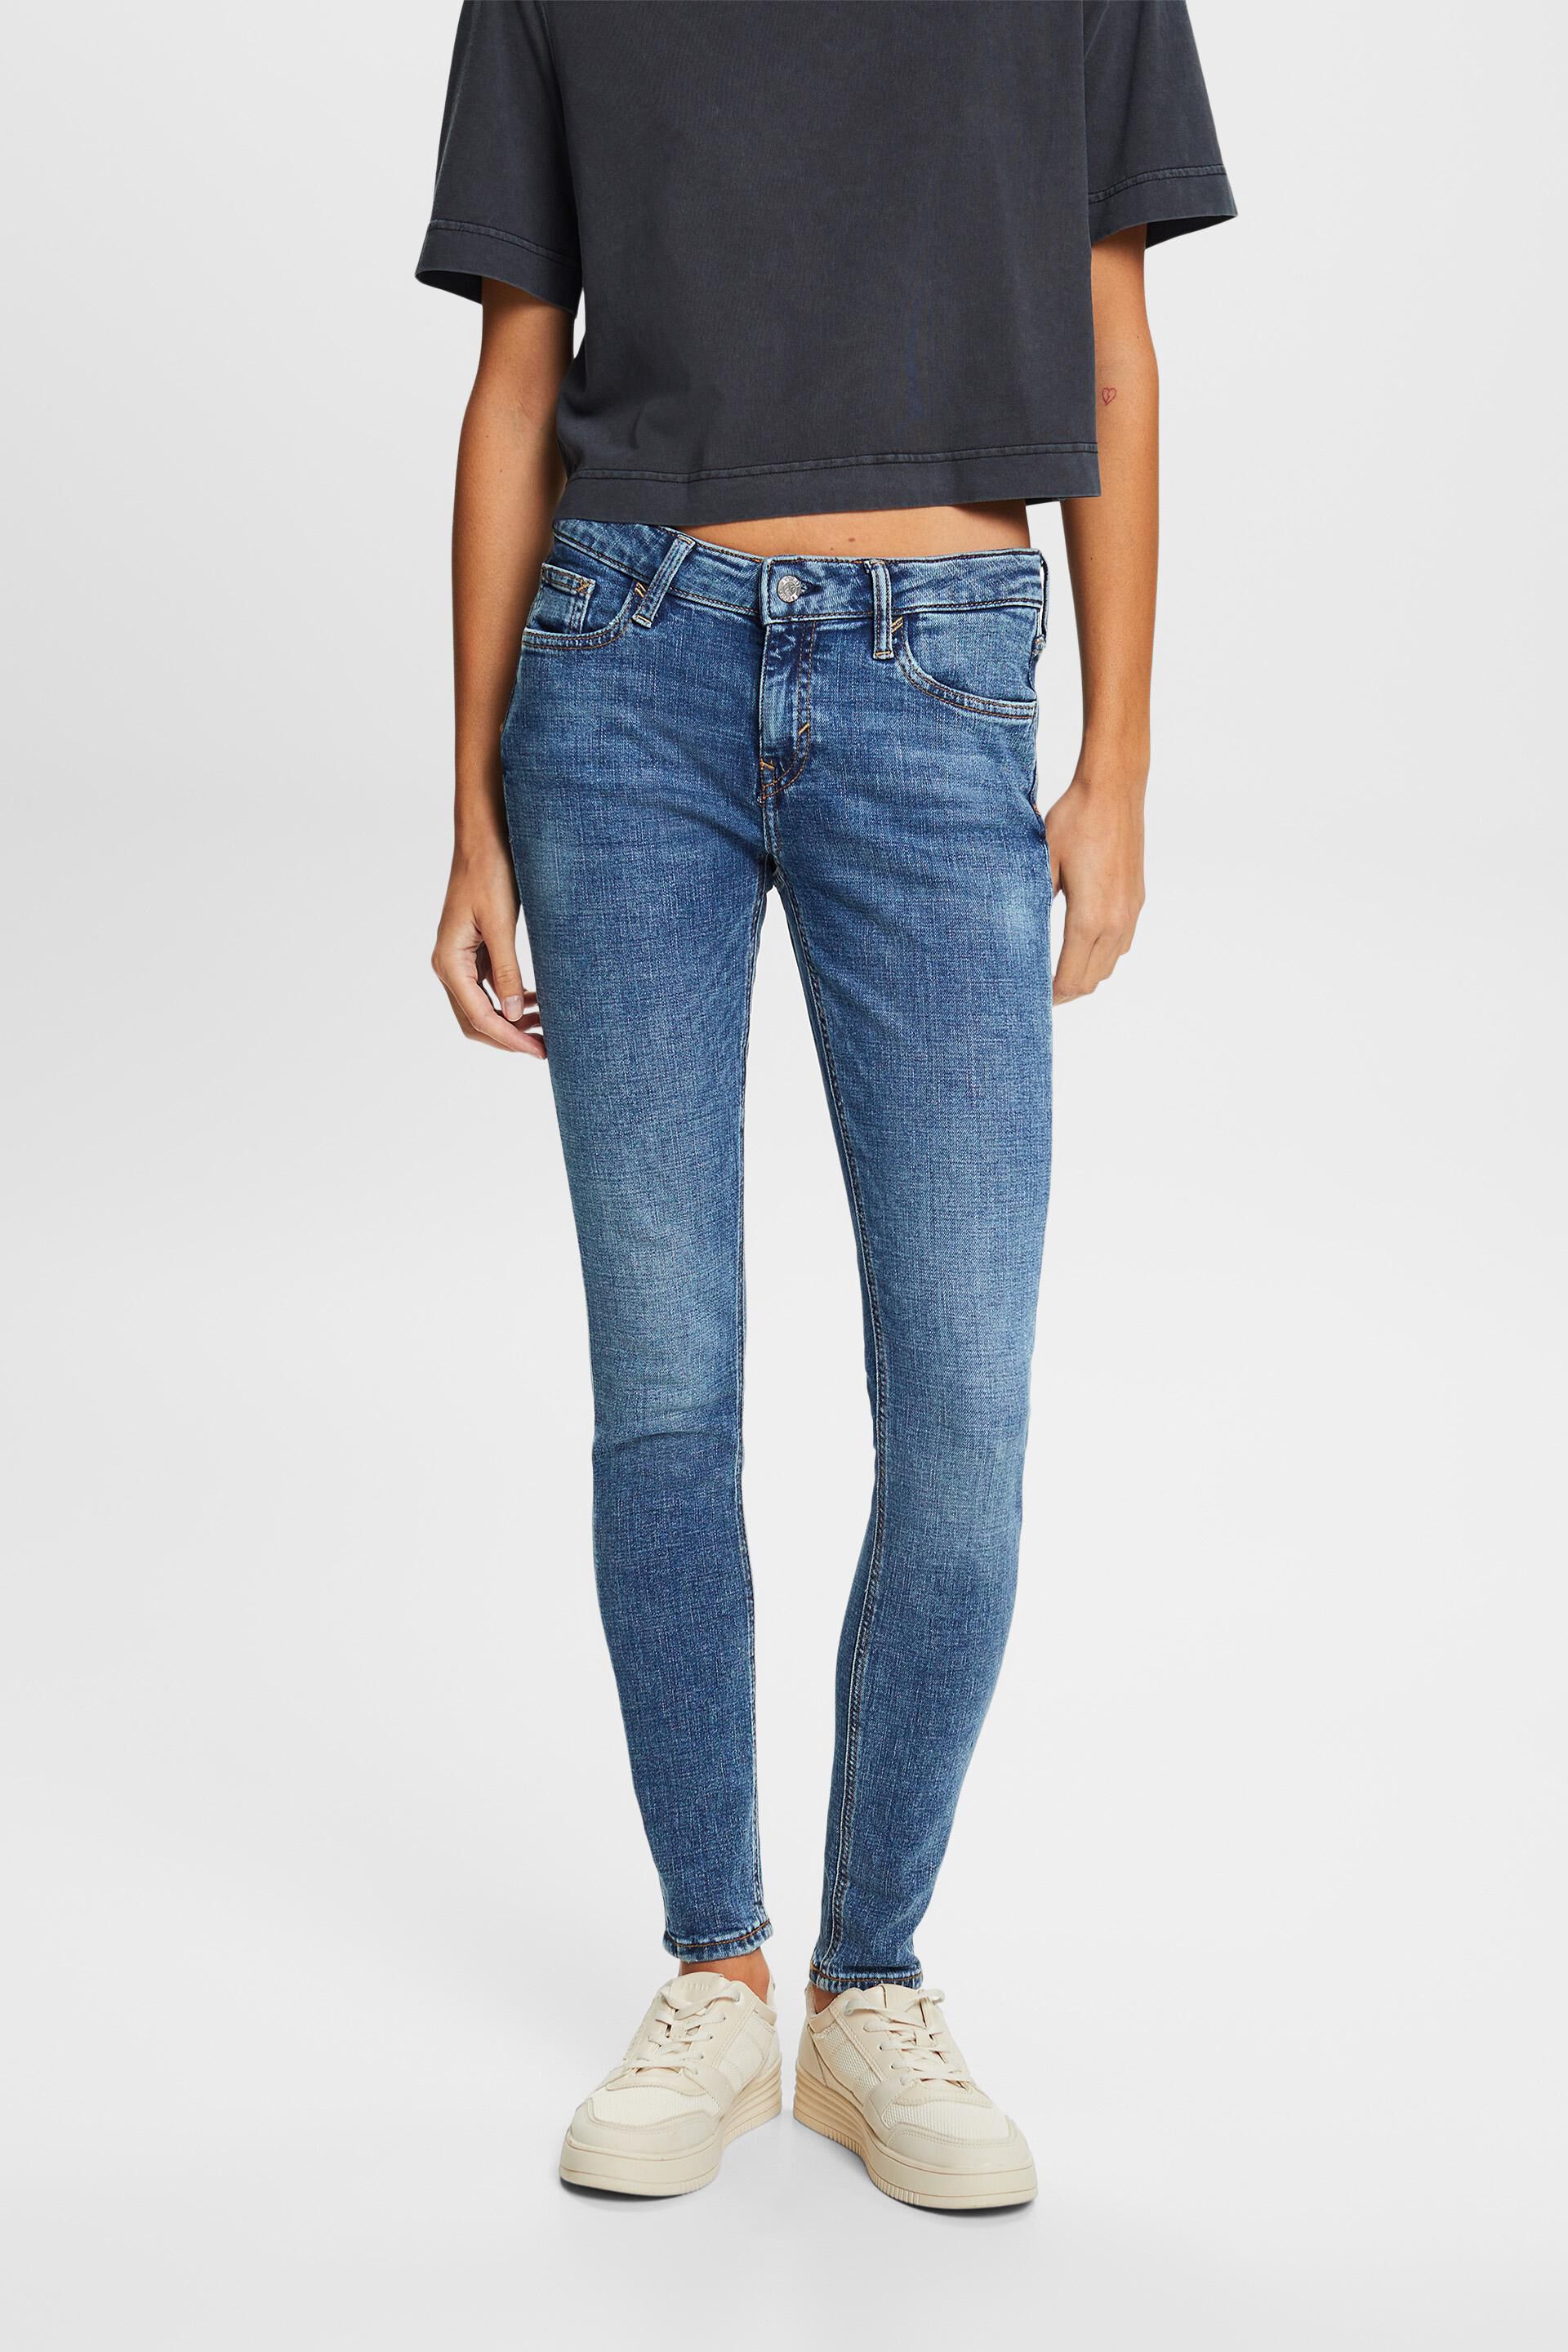 Esprit mid-rise skinny stretch fit jeans Recycled: